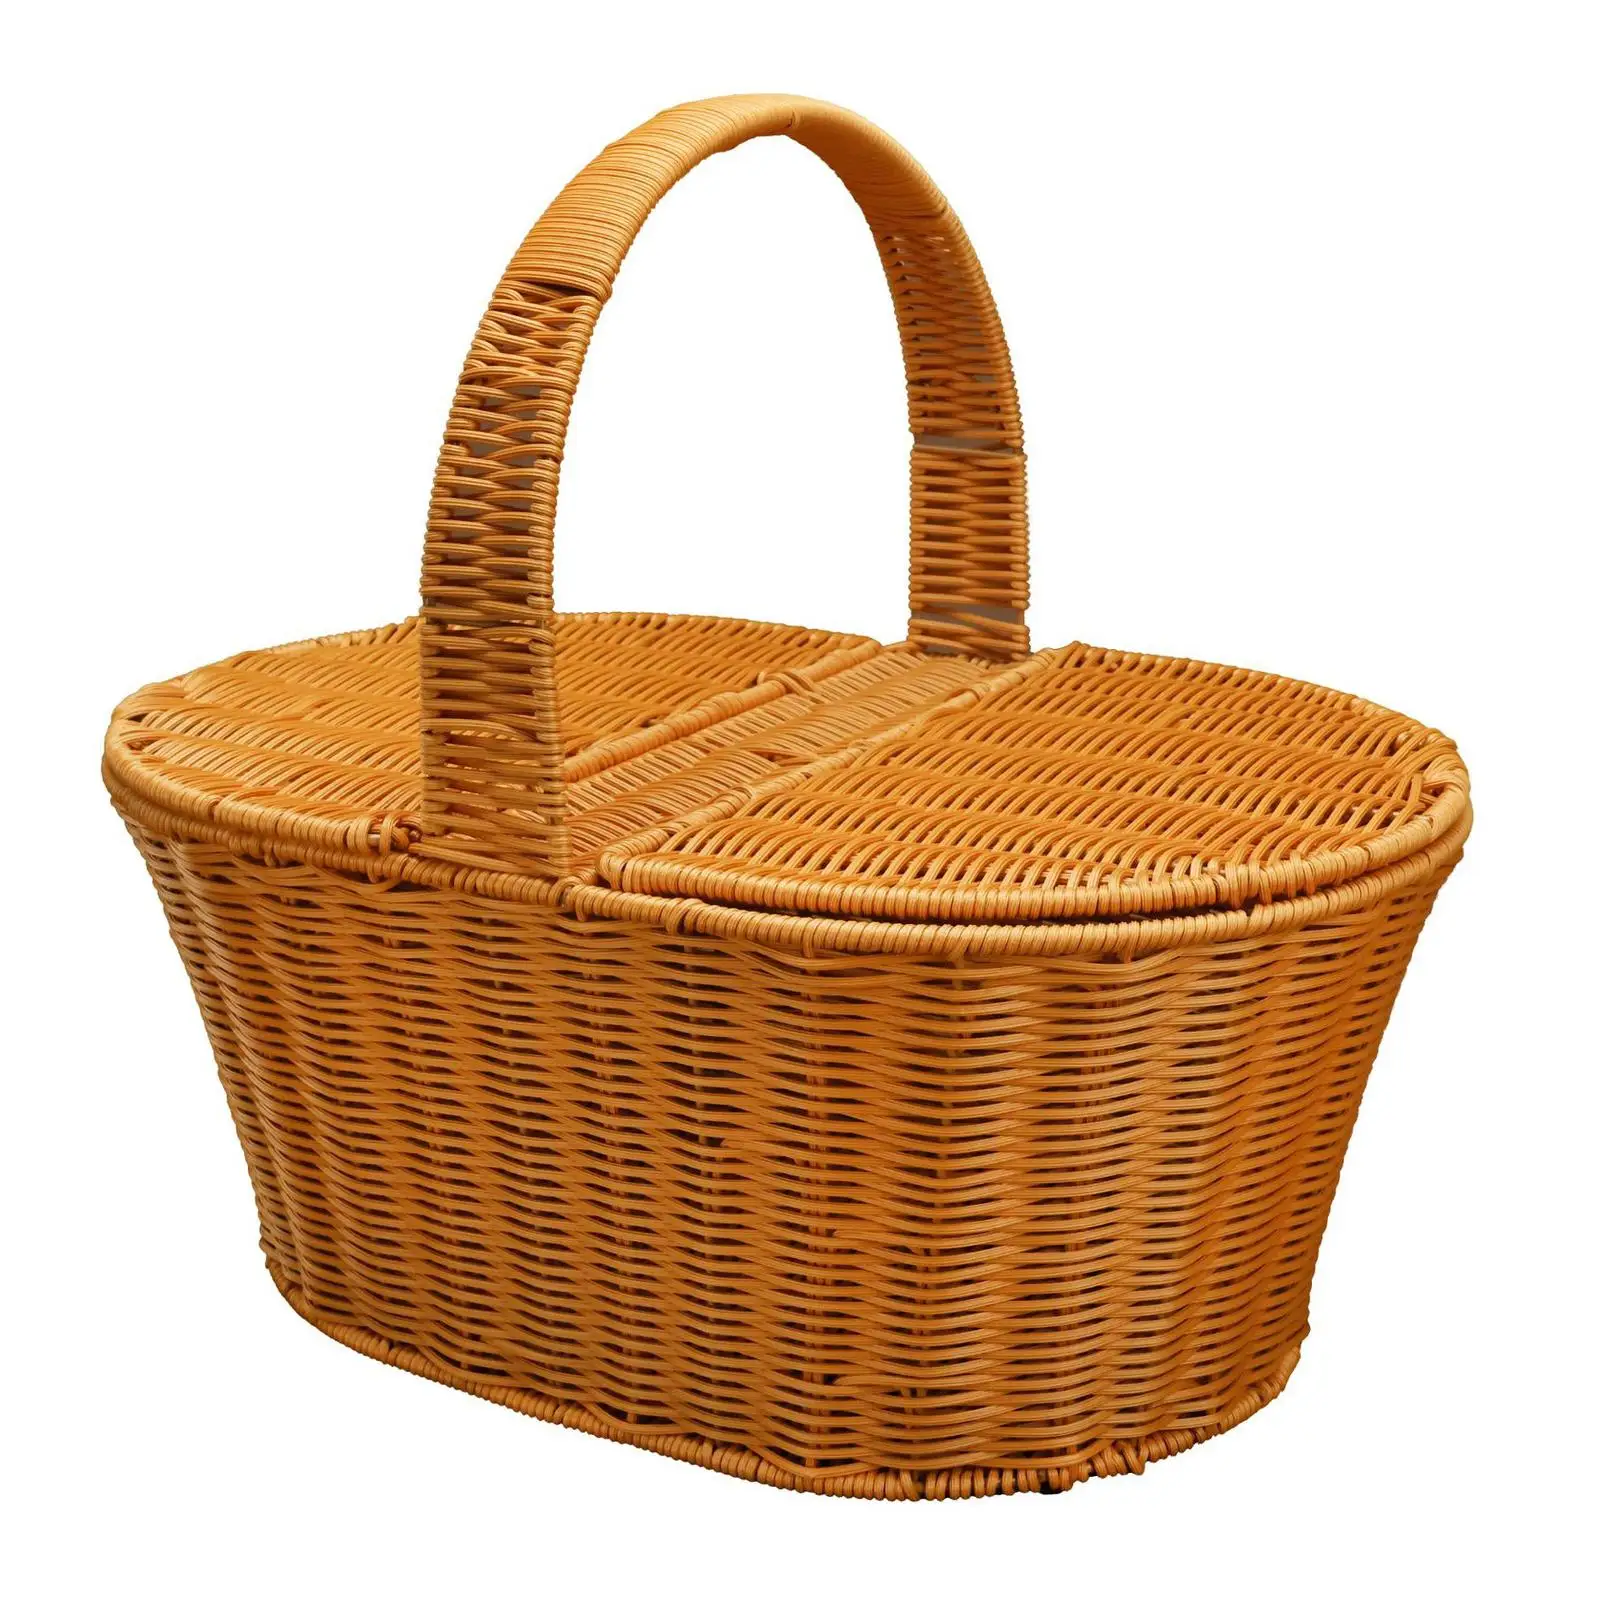 Woven Basket with Handles Large Capacity Decorative Snack Bread Basket for Picnic Kitchen Shopping Bathroom Cabinet